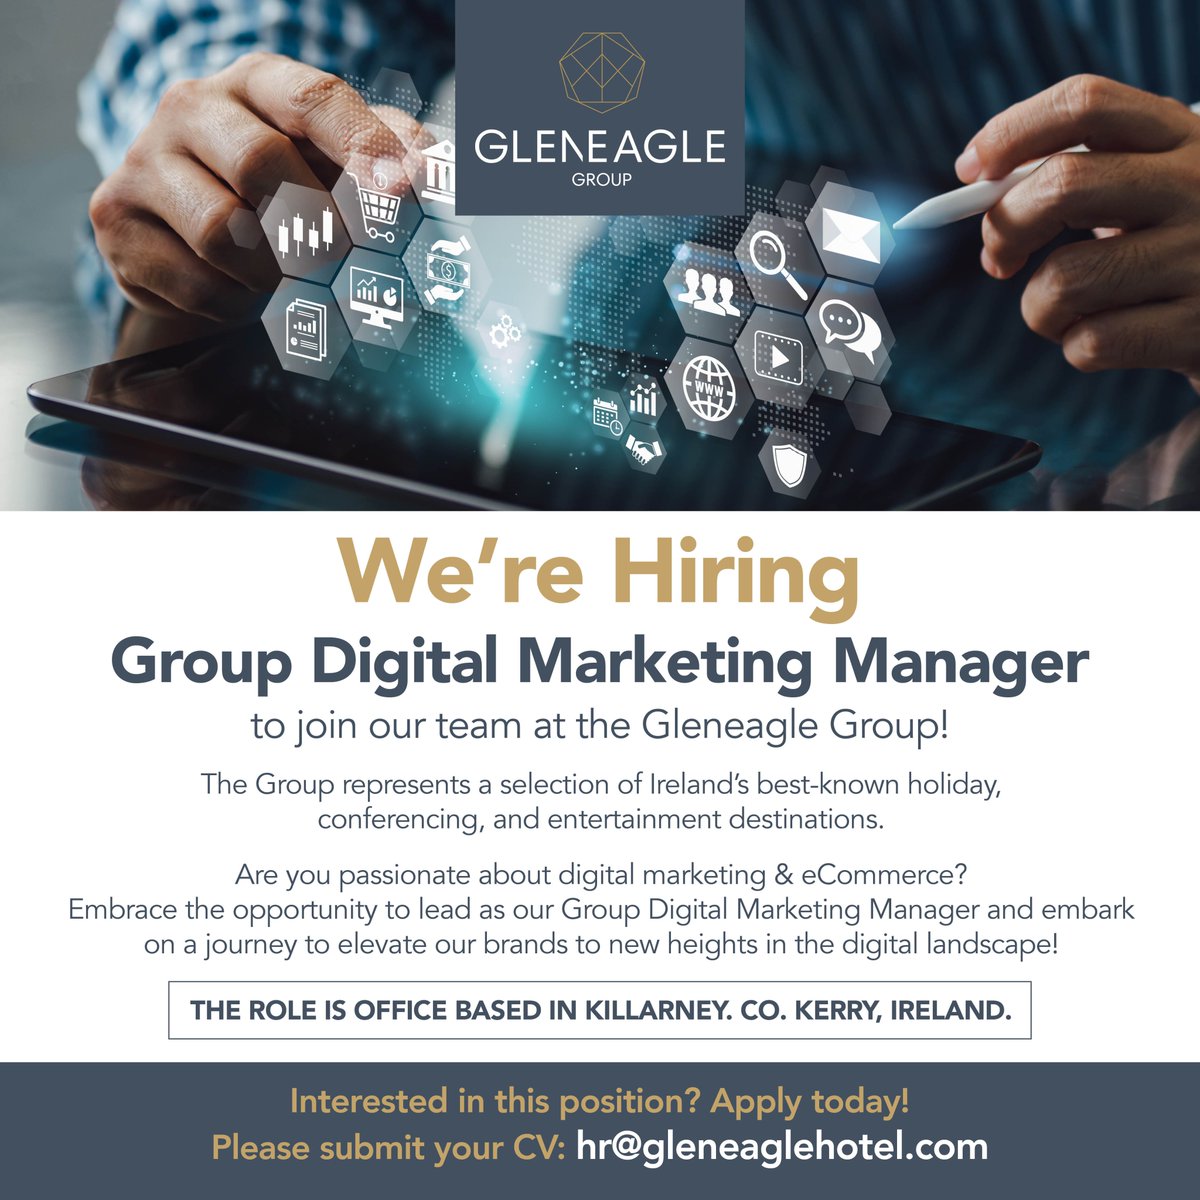 The Gleneagle Group is looking for a Group Digital Marketing Manager to join our team. apply here! api.occupop.com/shared/job/gro…